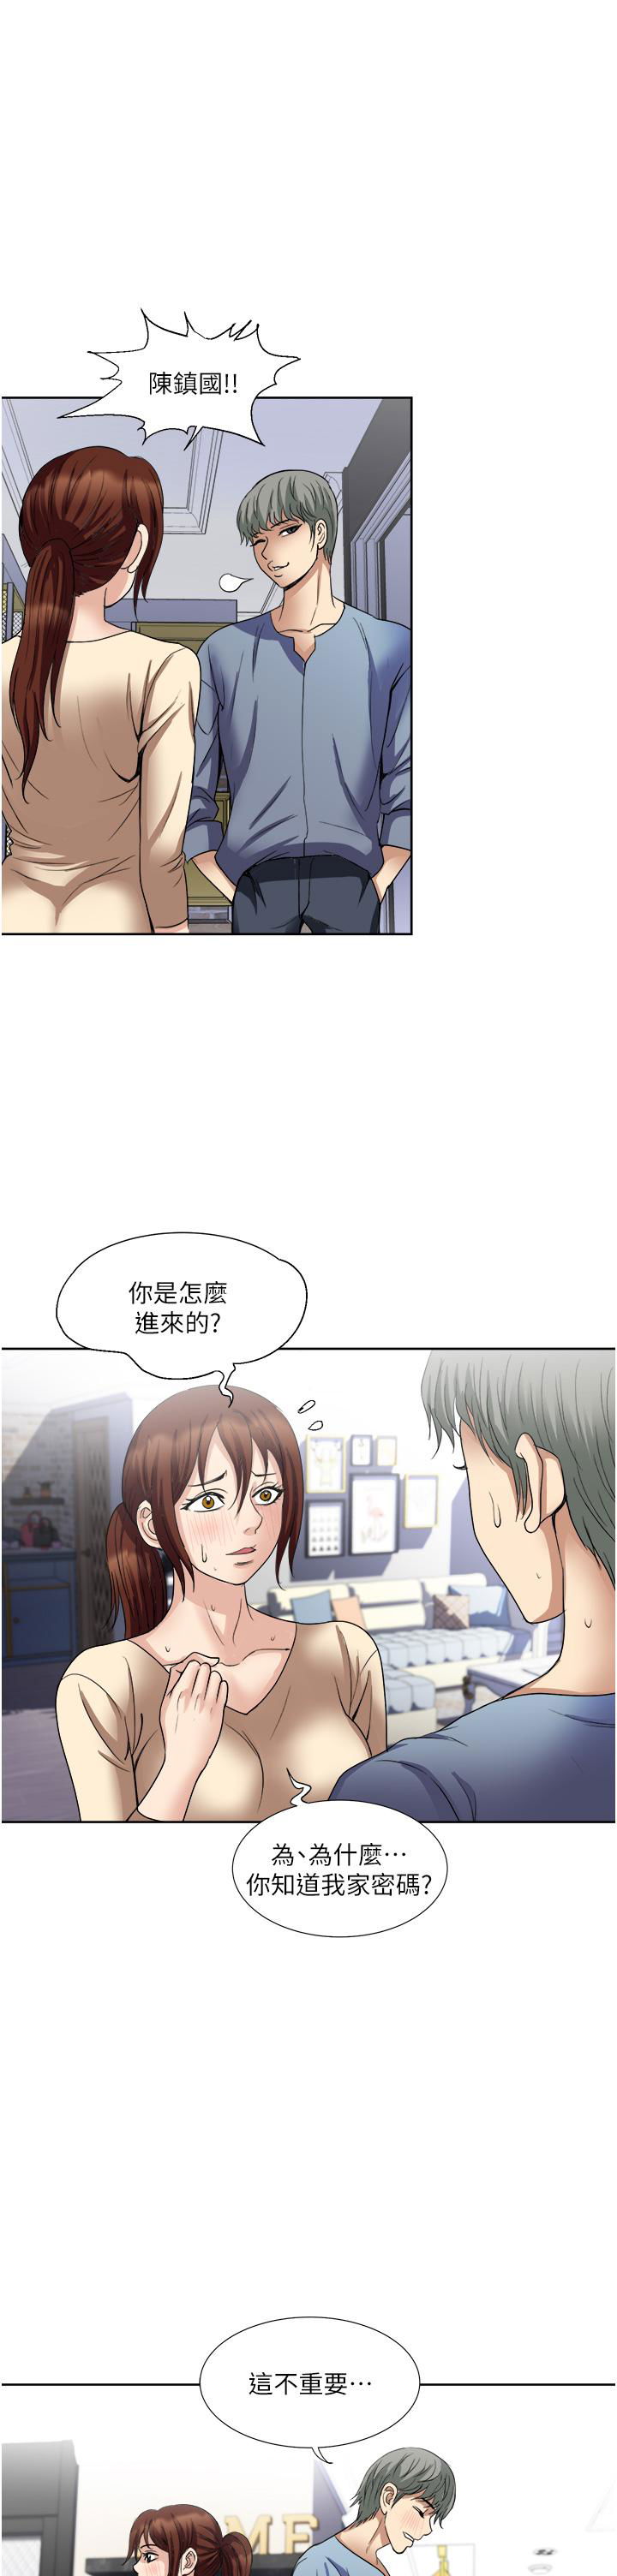 just-once-raw-chap-32-24